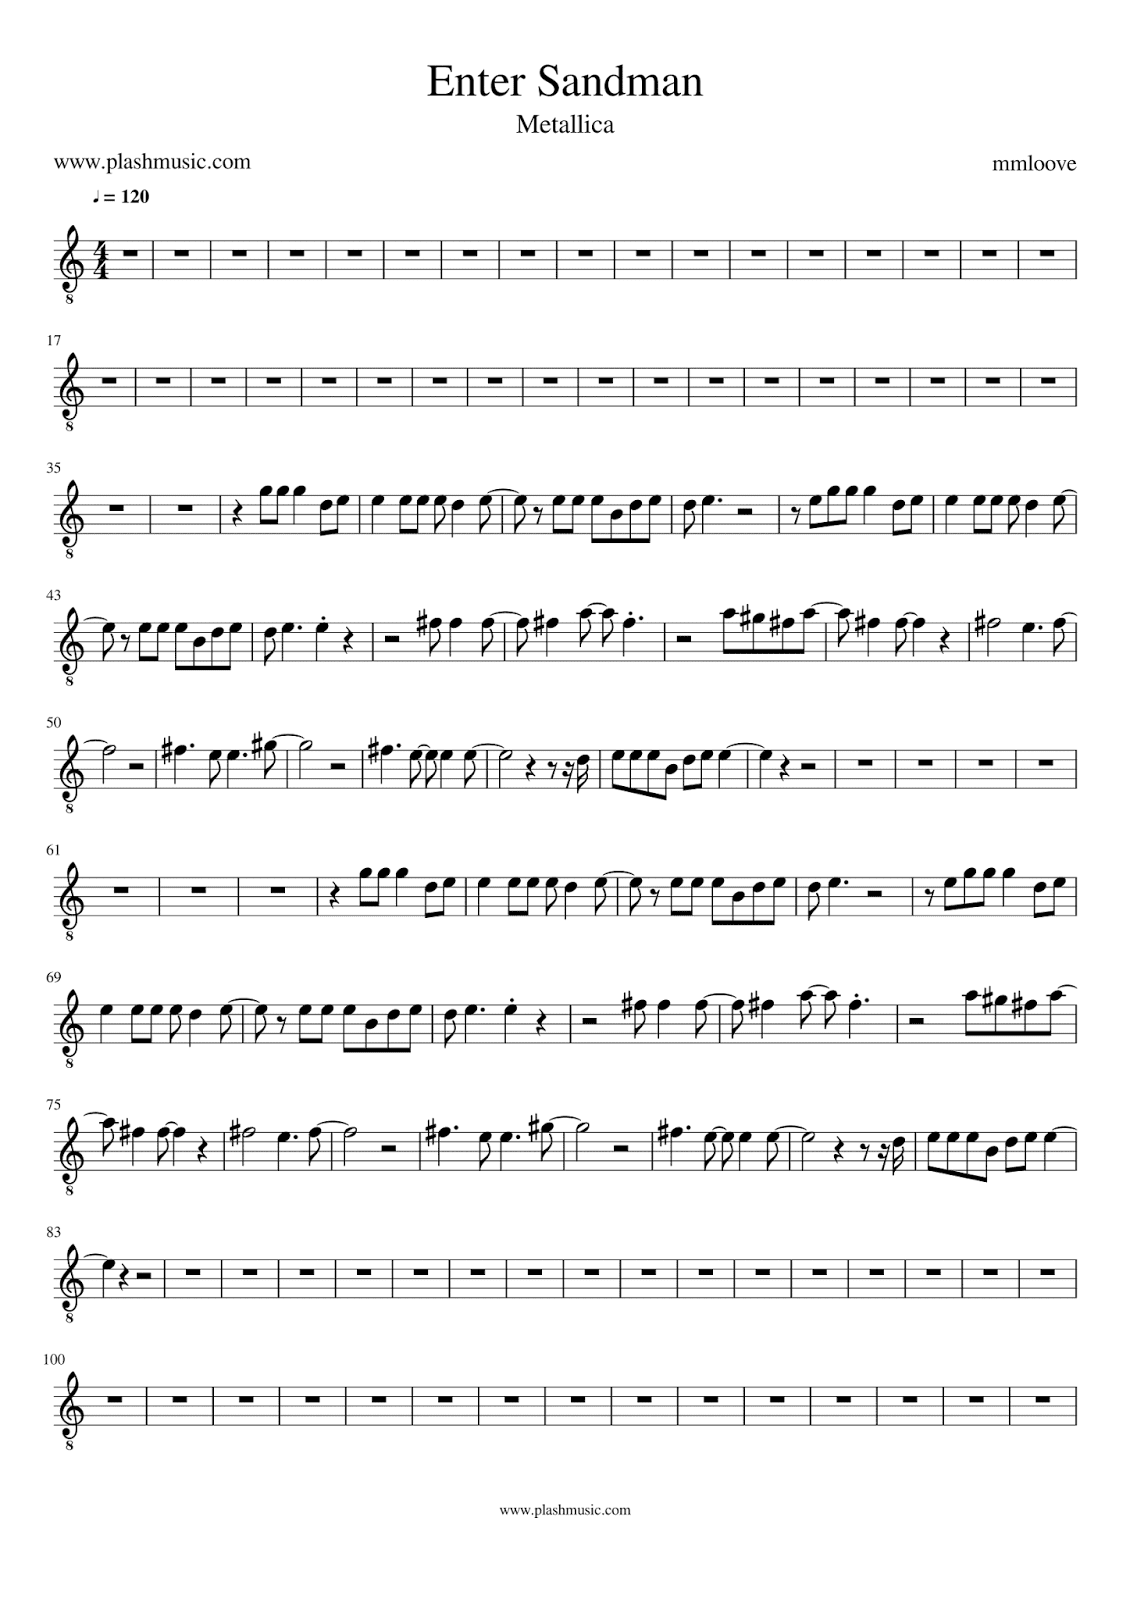 Sheet music and backing track of Enter Sandman by Metallica.